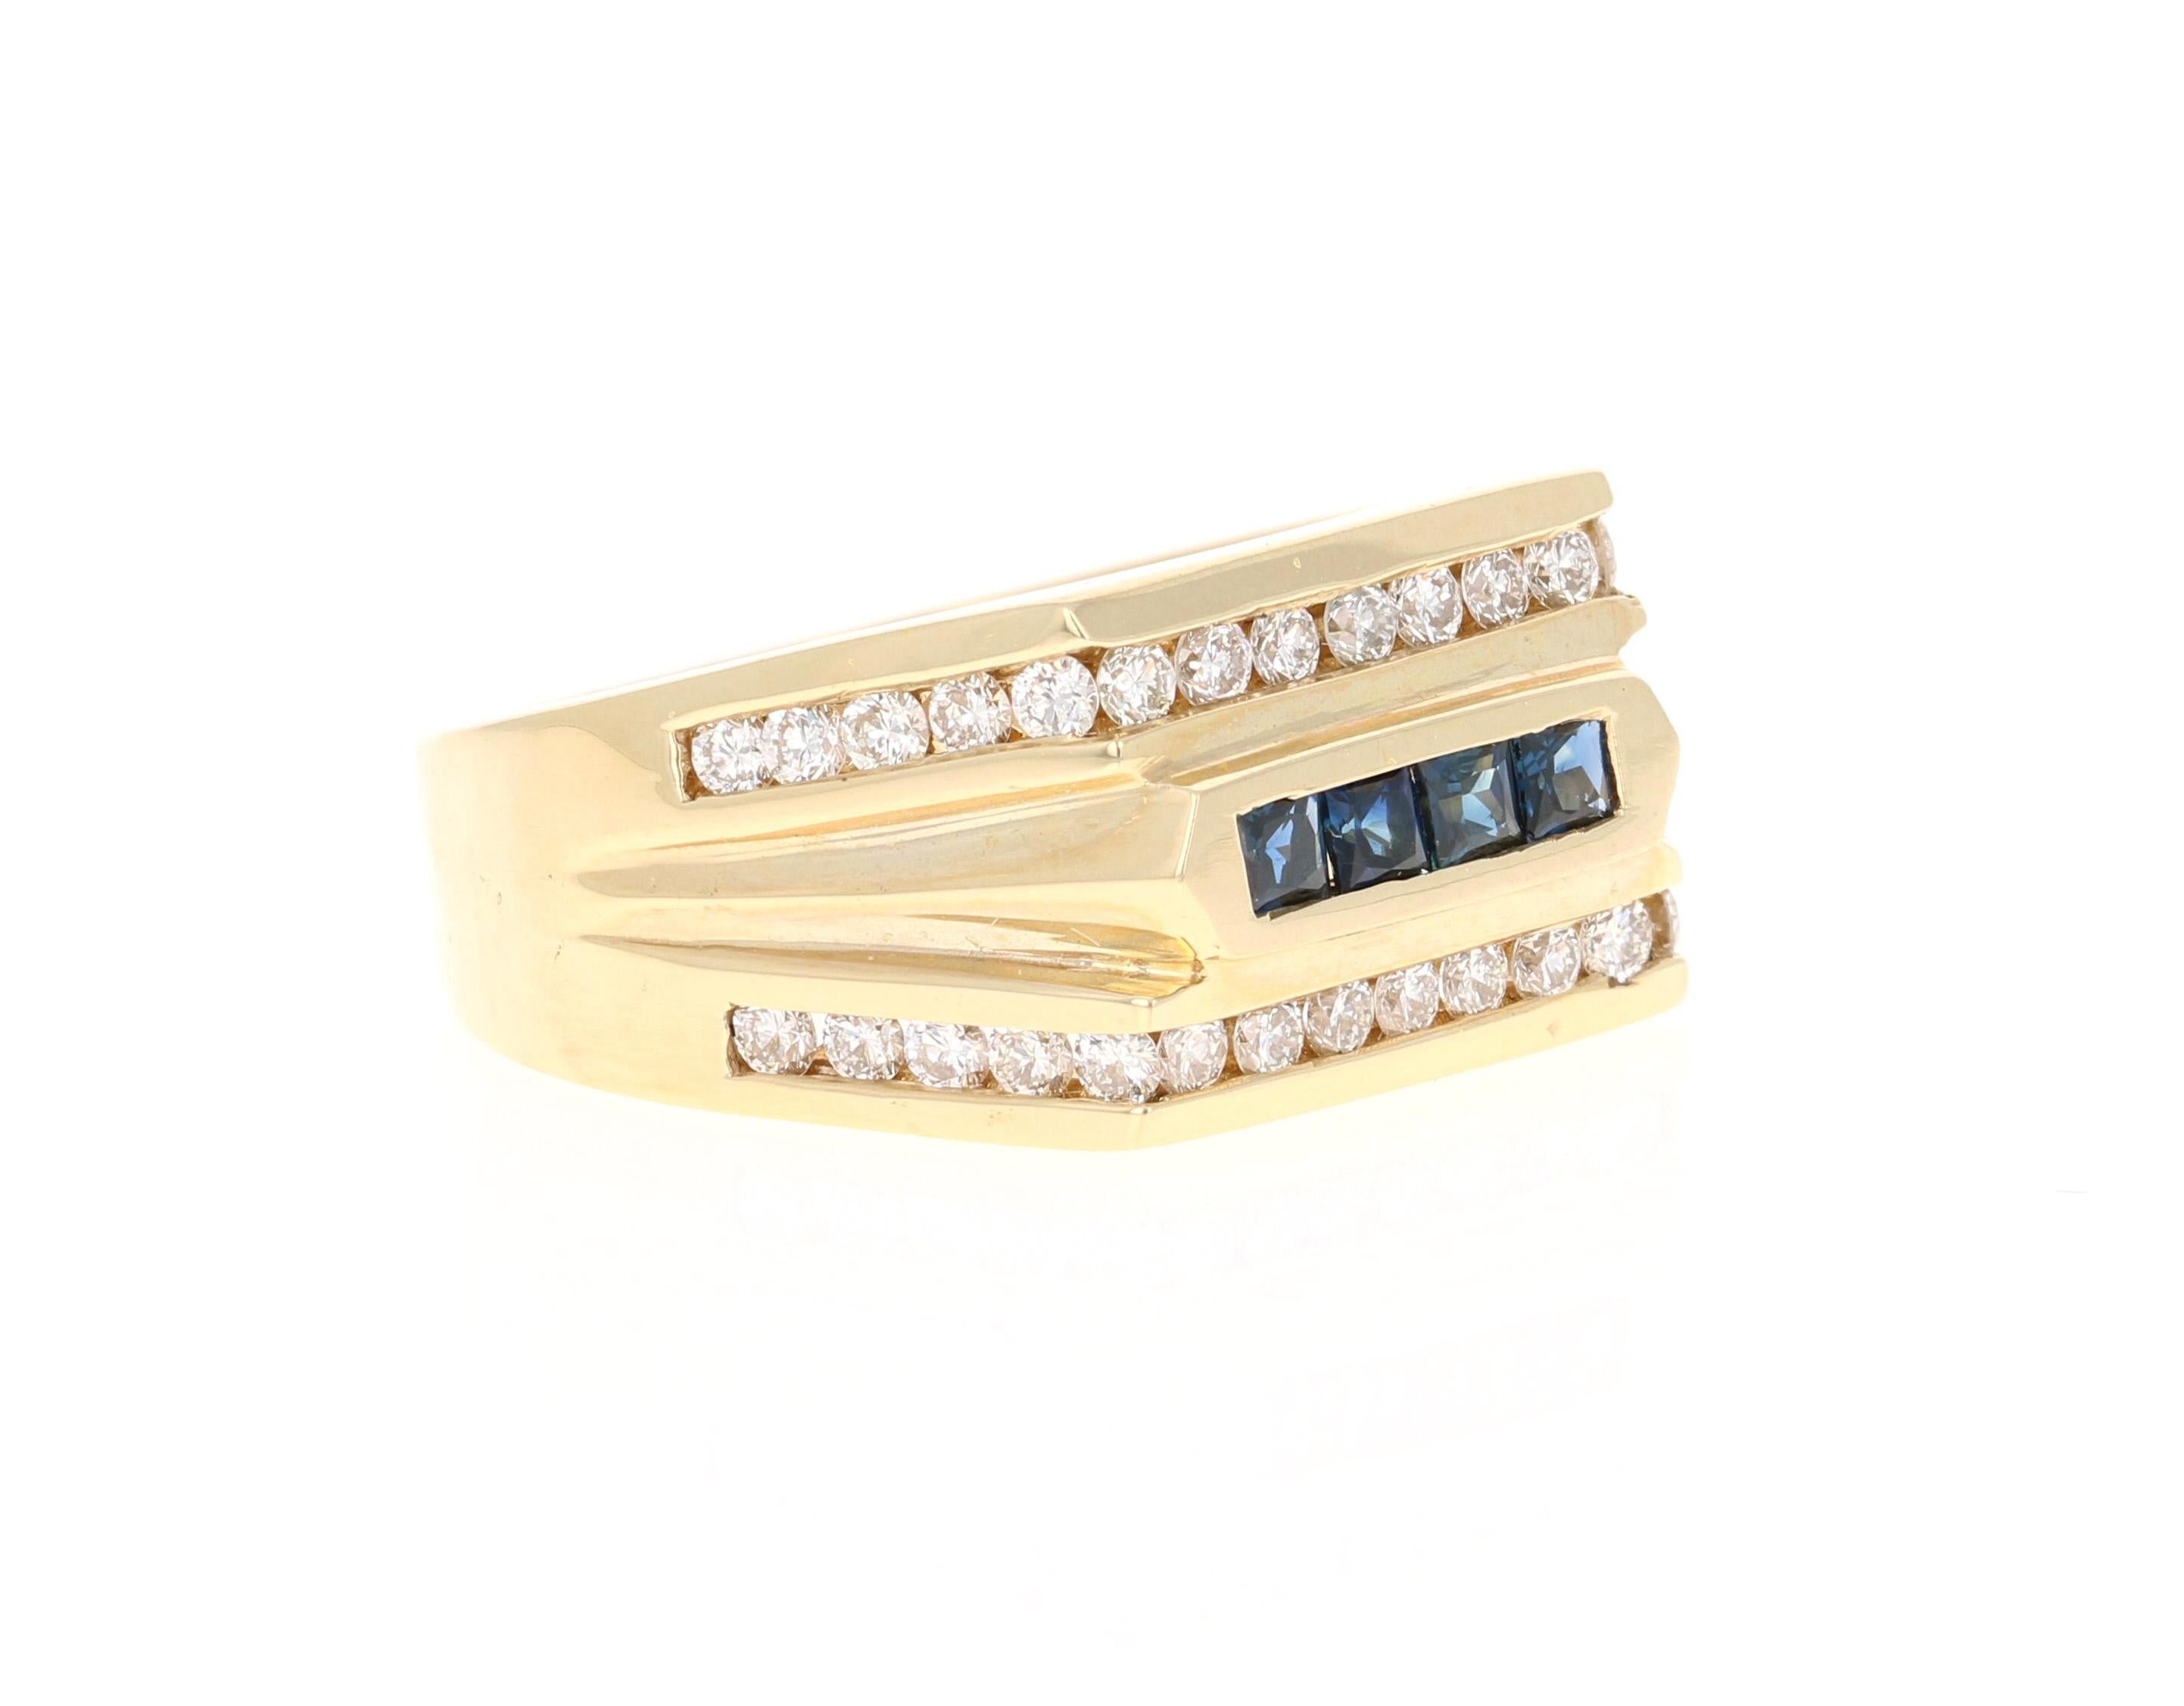 This piece is set with 4 Sapphires that weigh 0.45 Carats and 35 Round Cut Diamonds that weigh 1.03 Carats. The Total Carat Weight of the ring is 1.48 Carats. 

It is beautifully curated in 14 Karat Yellow Gold and weighs approximately 11.2 grams.